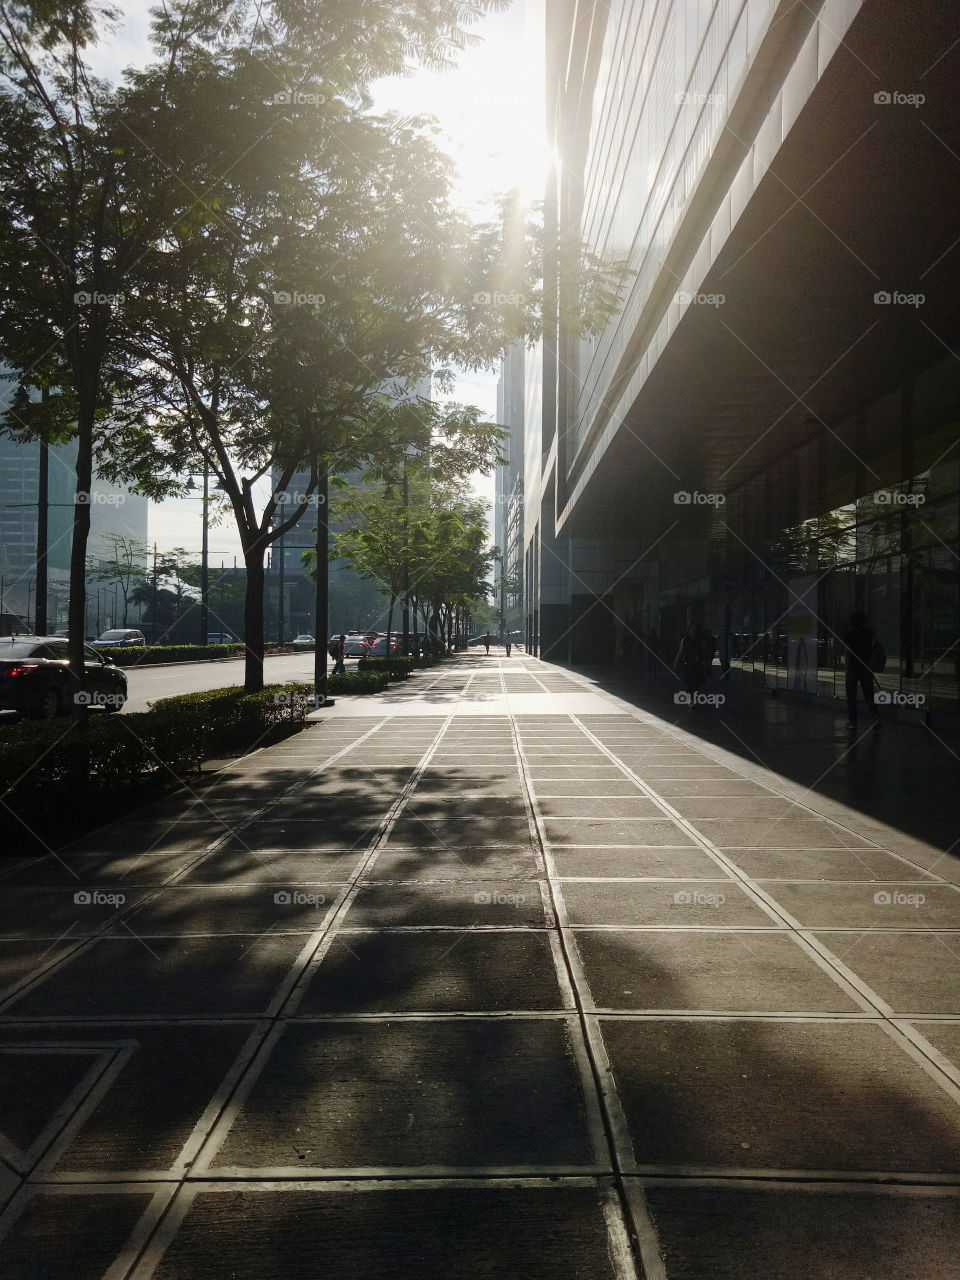 Suns kiss
Daily grind around the busy streets of BGC.
The Bonifacio Global City of the Philippines!